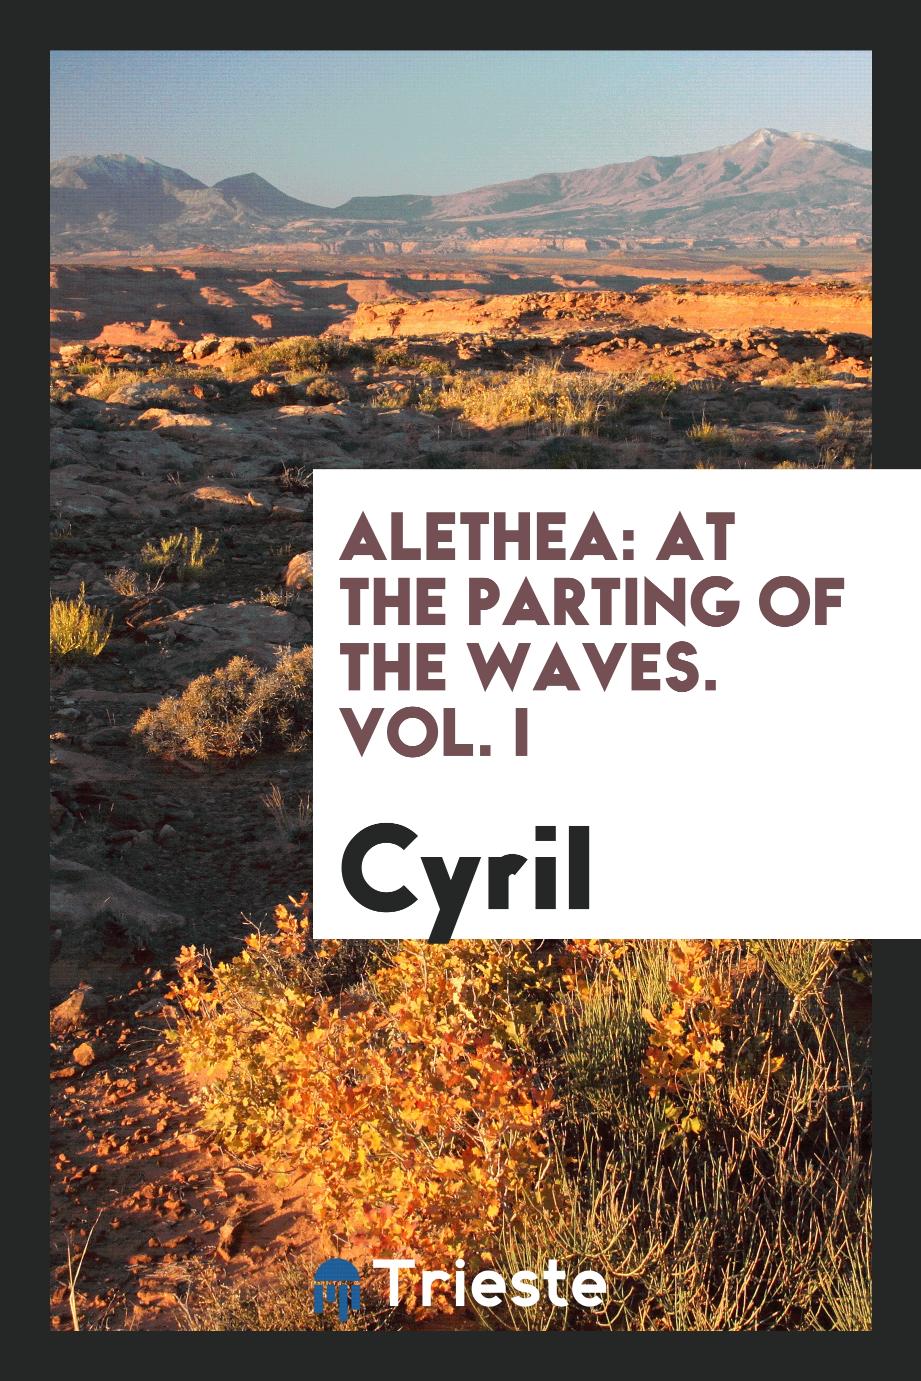 Alethea: at the parting of the waves. Vol. I